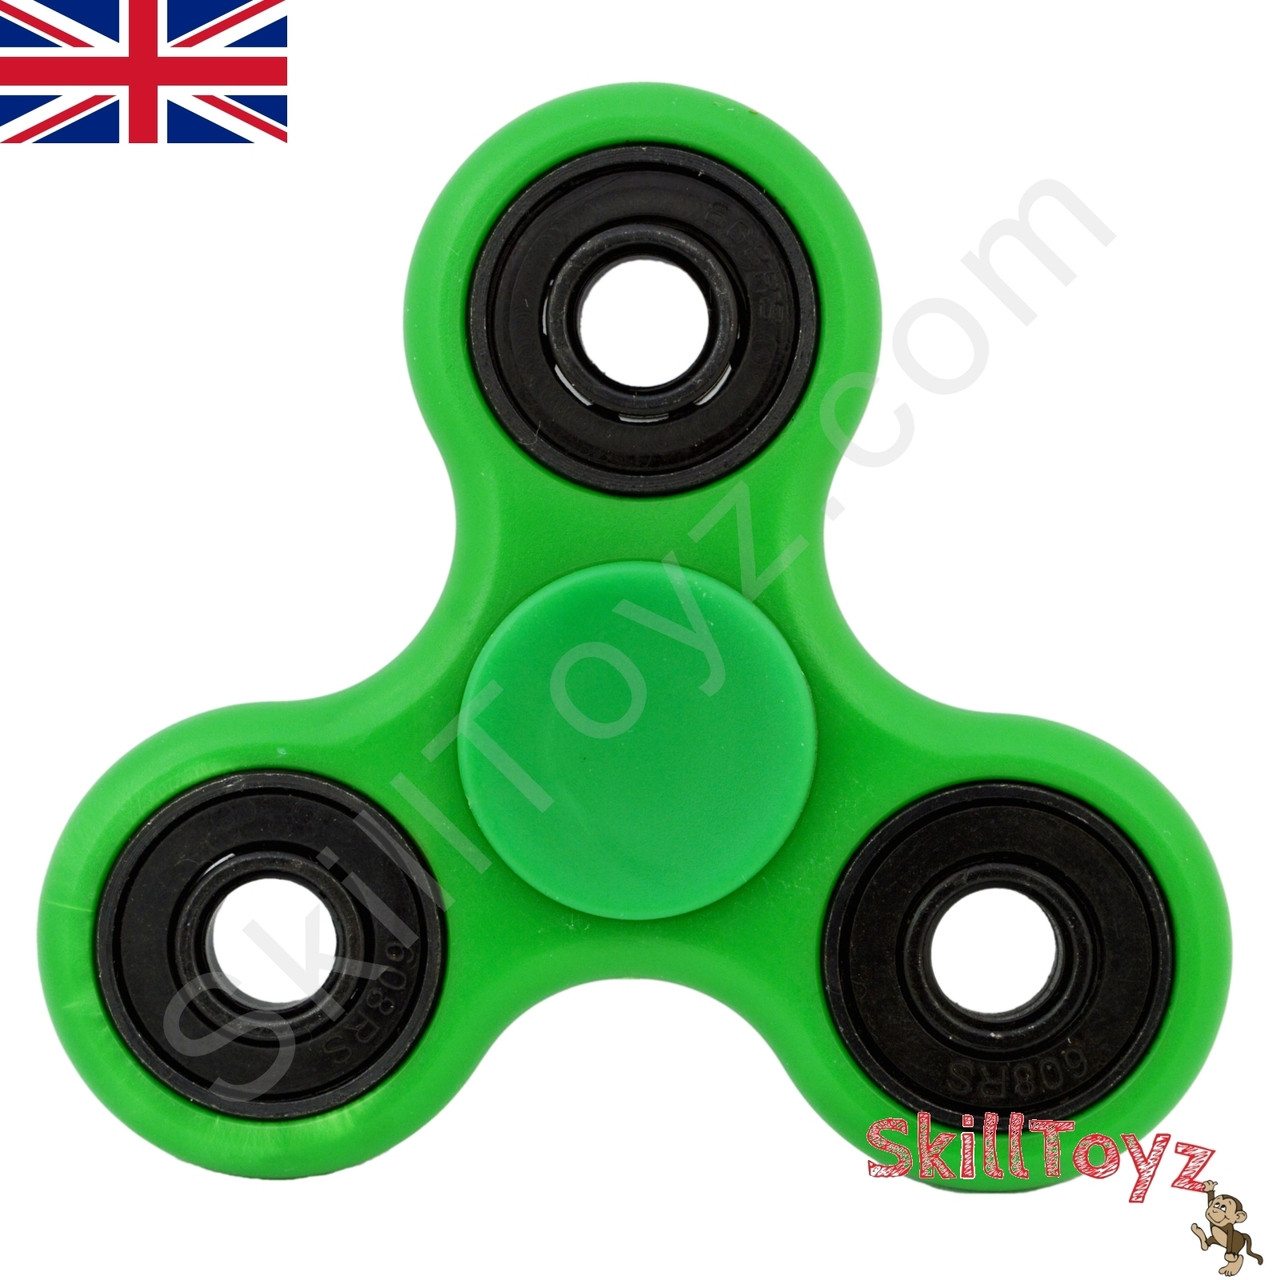 HAND SPINNER BRIGHT FIDGET SPINNING TOP GAME EDUCATIONAL TOY CHILD ADULT  BEARING